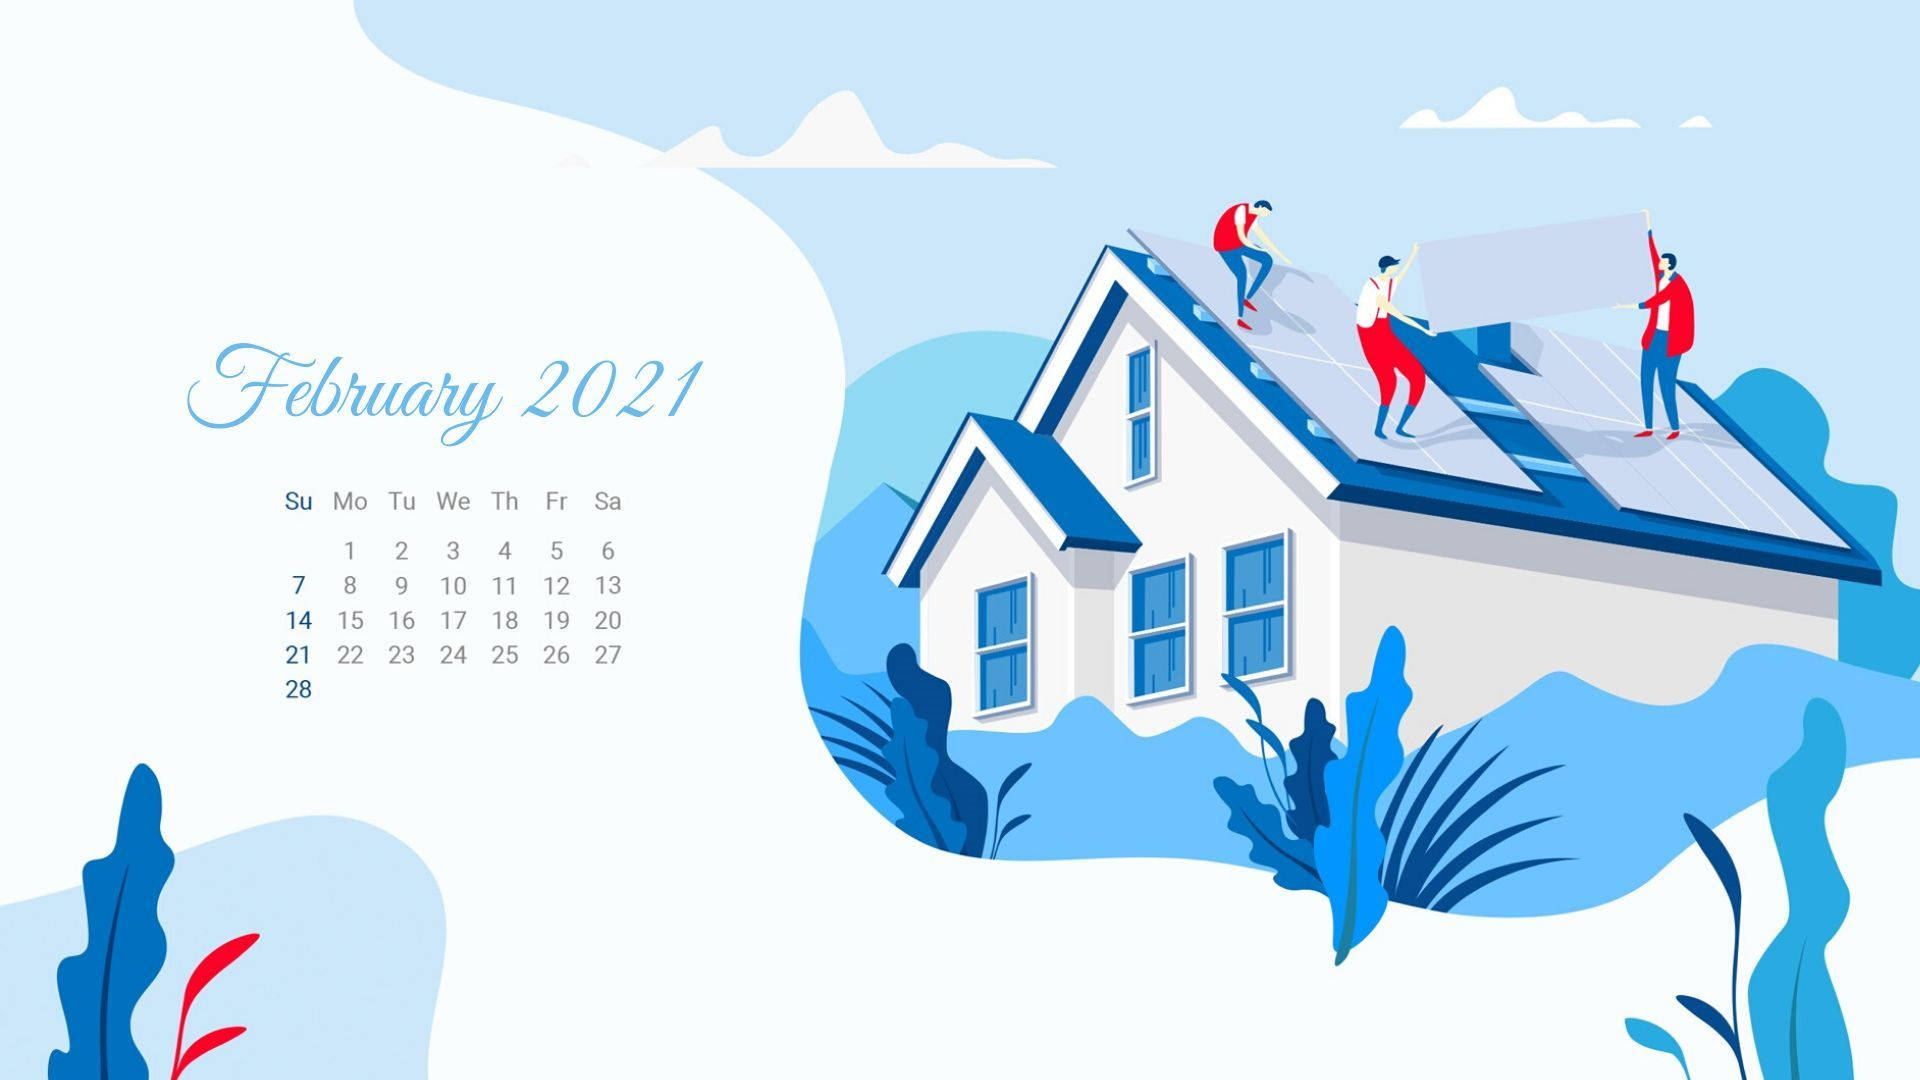 february 2021 calendar with people on the roof Wallpaper